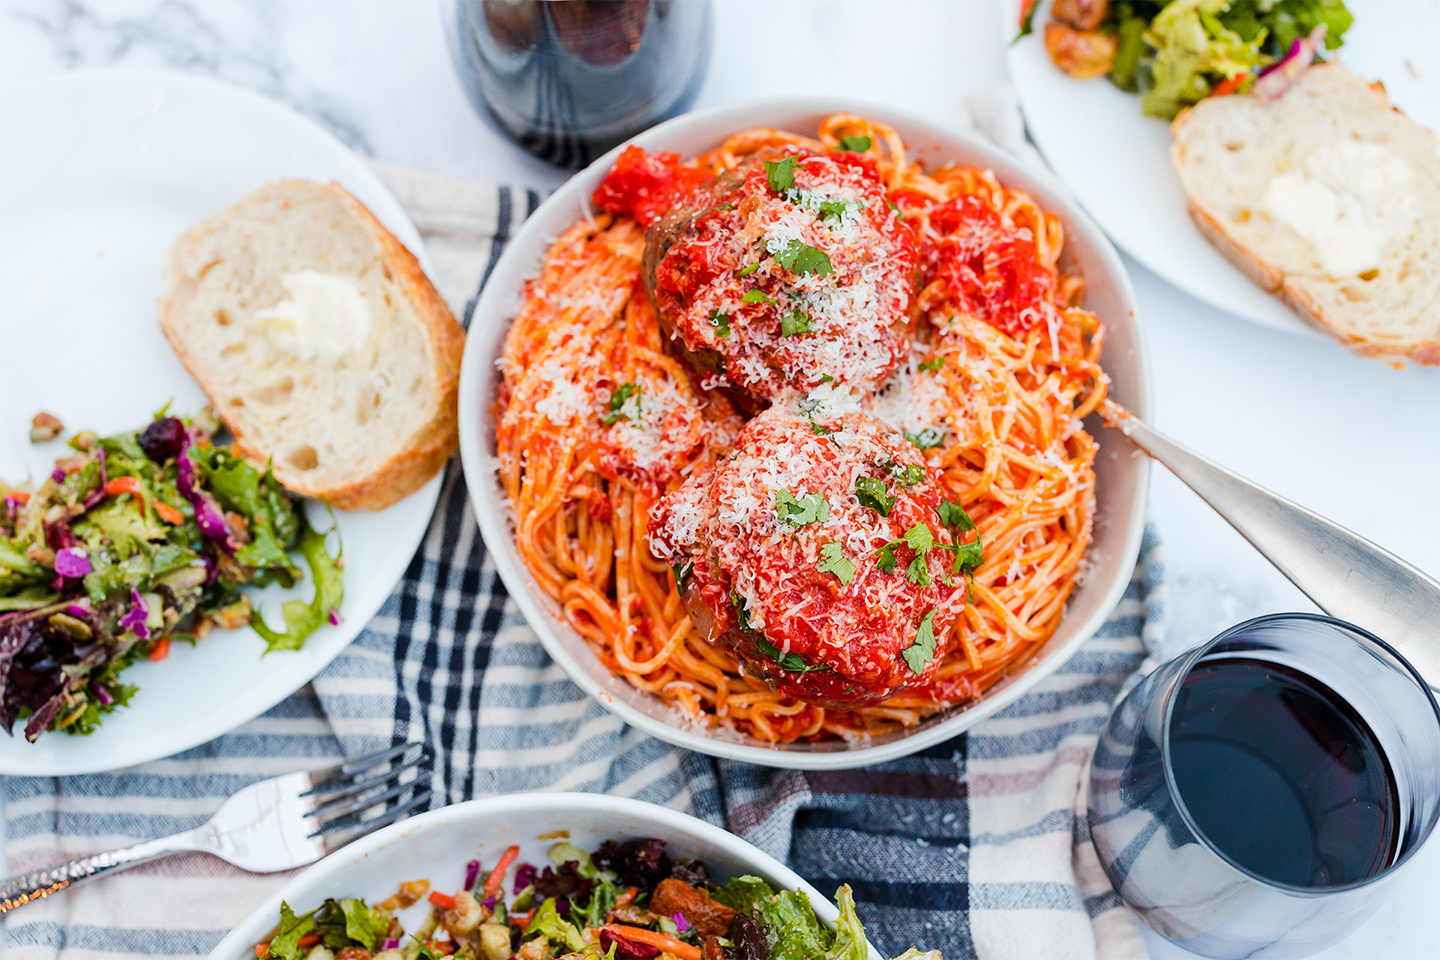 spaghetti and meatballs with freshly grated parmesan on a table with salad, bread and glasses of red wine.